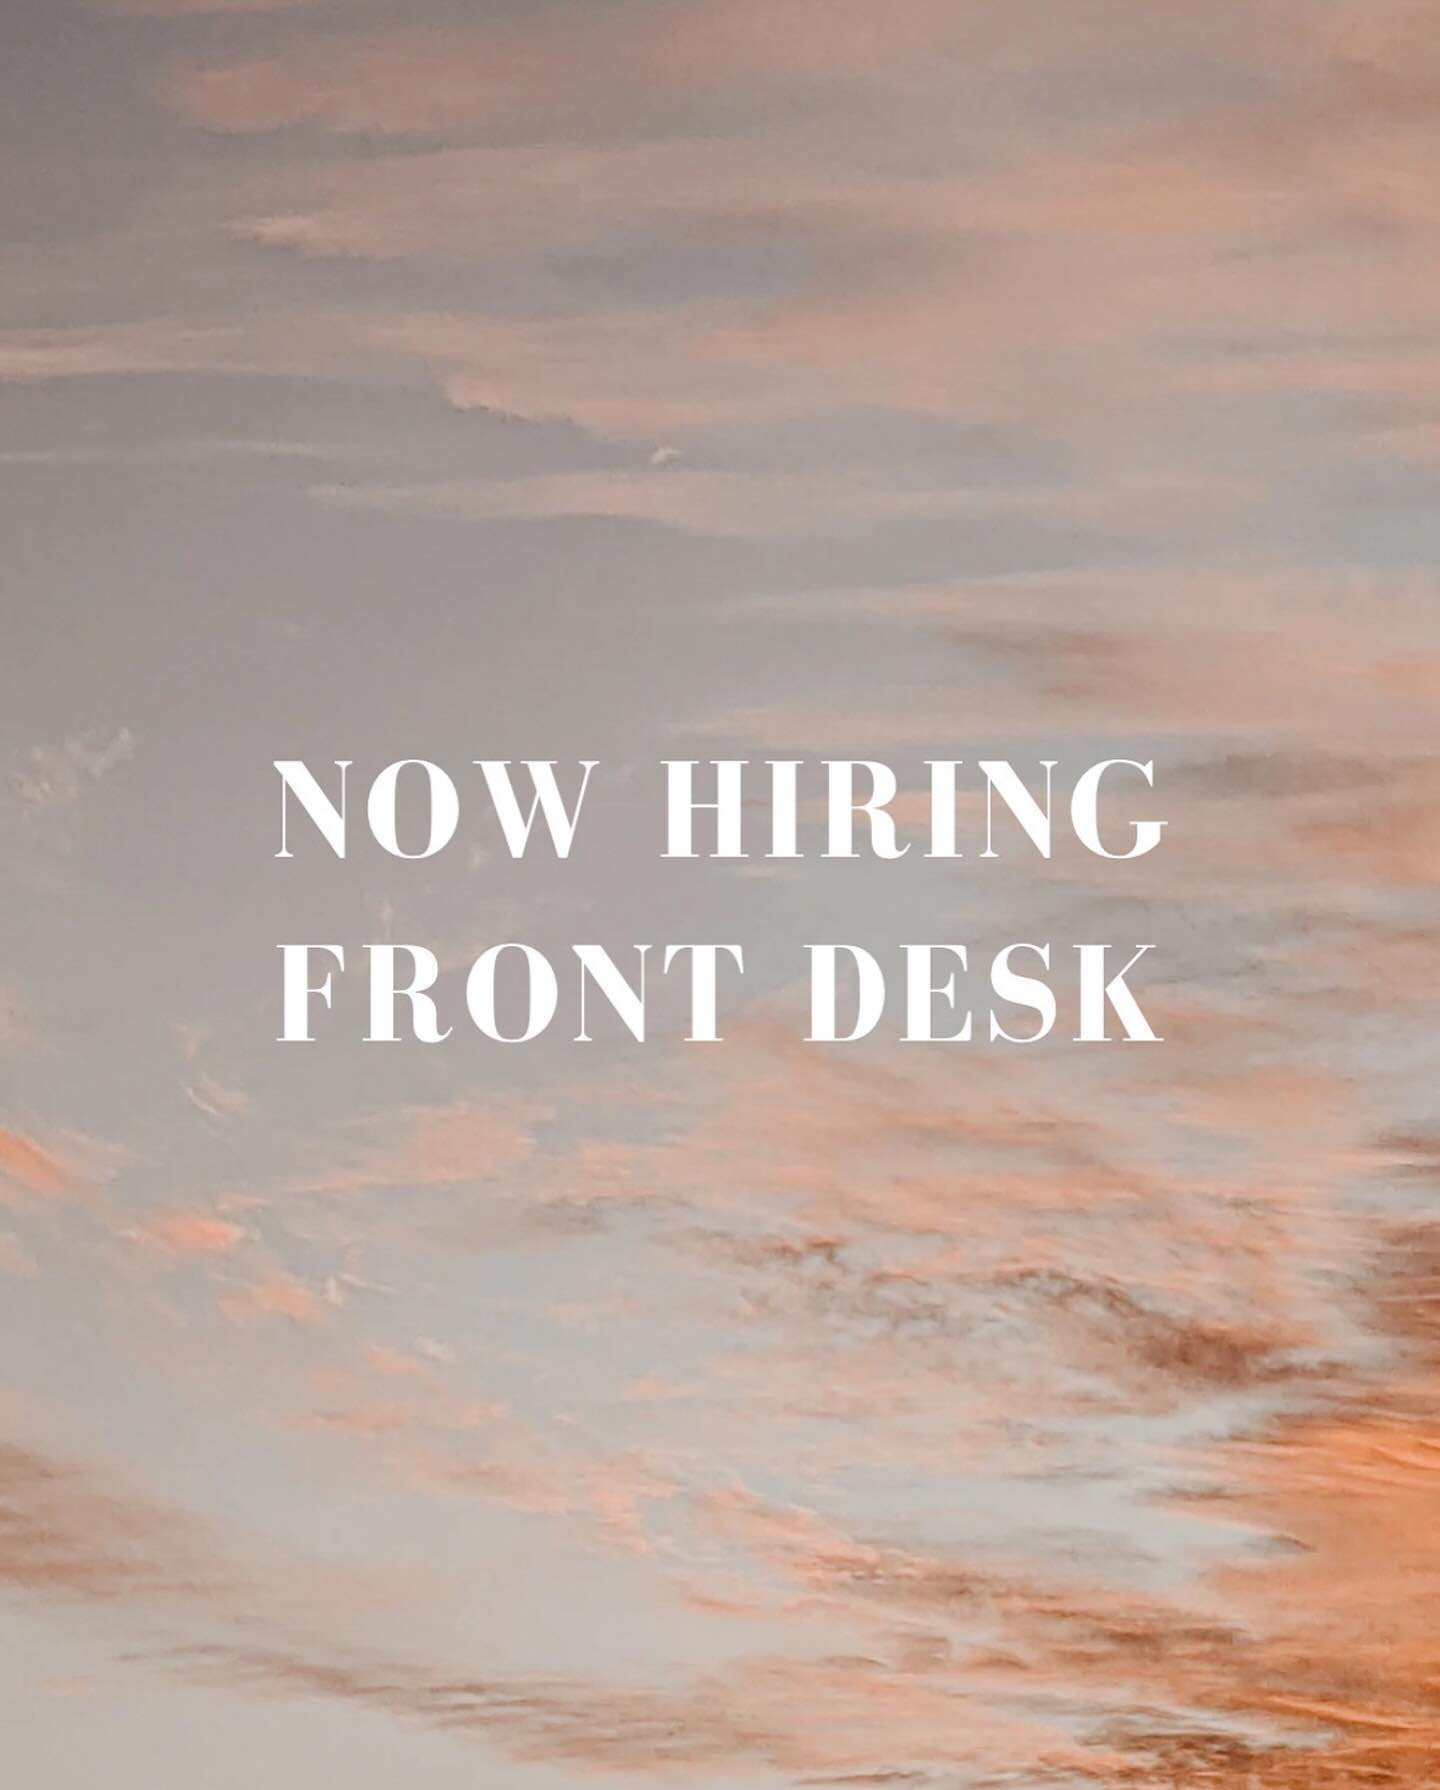 We&rsquo;re Hiring for a Front Desk position! Are you or someone you know the perfect addition to our team?!
Send us a DM if you&rsquo;d like more information or 
check out the CAREER page on our website 😎 ☀️ 🌴